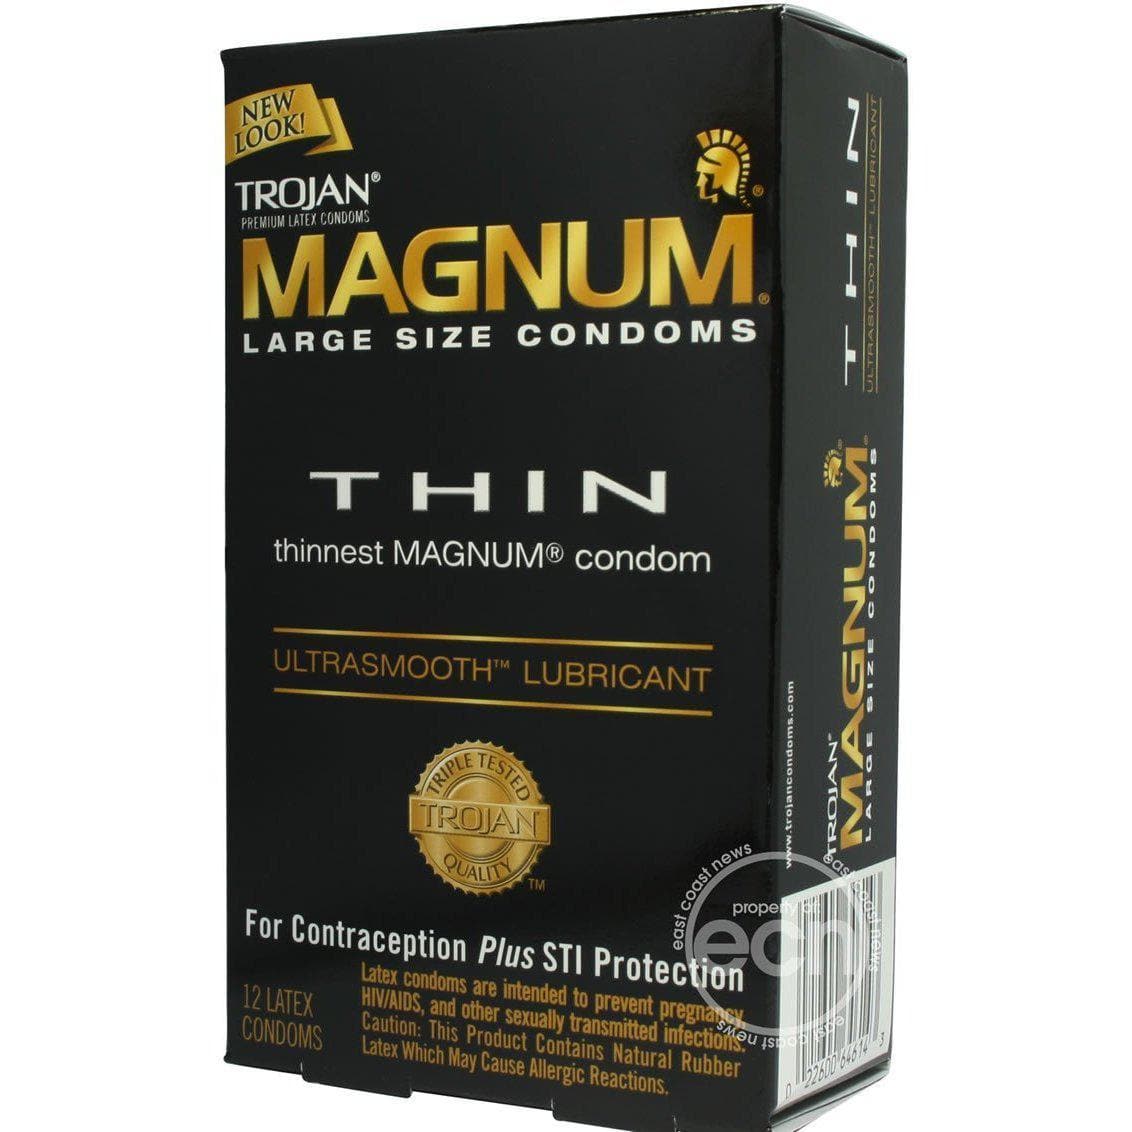 Trojan Condom Magnum Thin Large Size Lubricated 12 Pack - Romantic Blessings